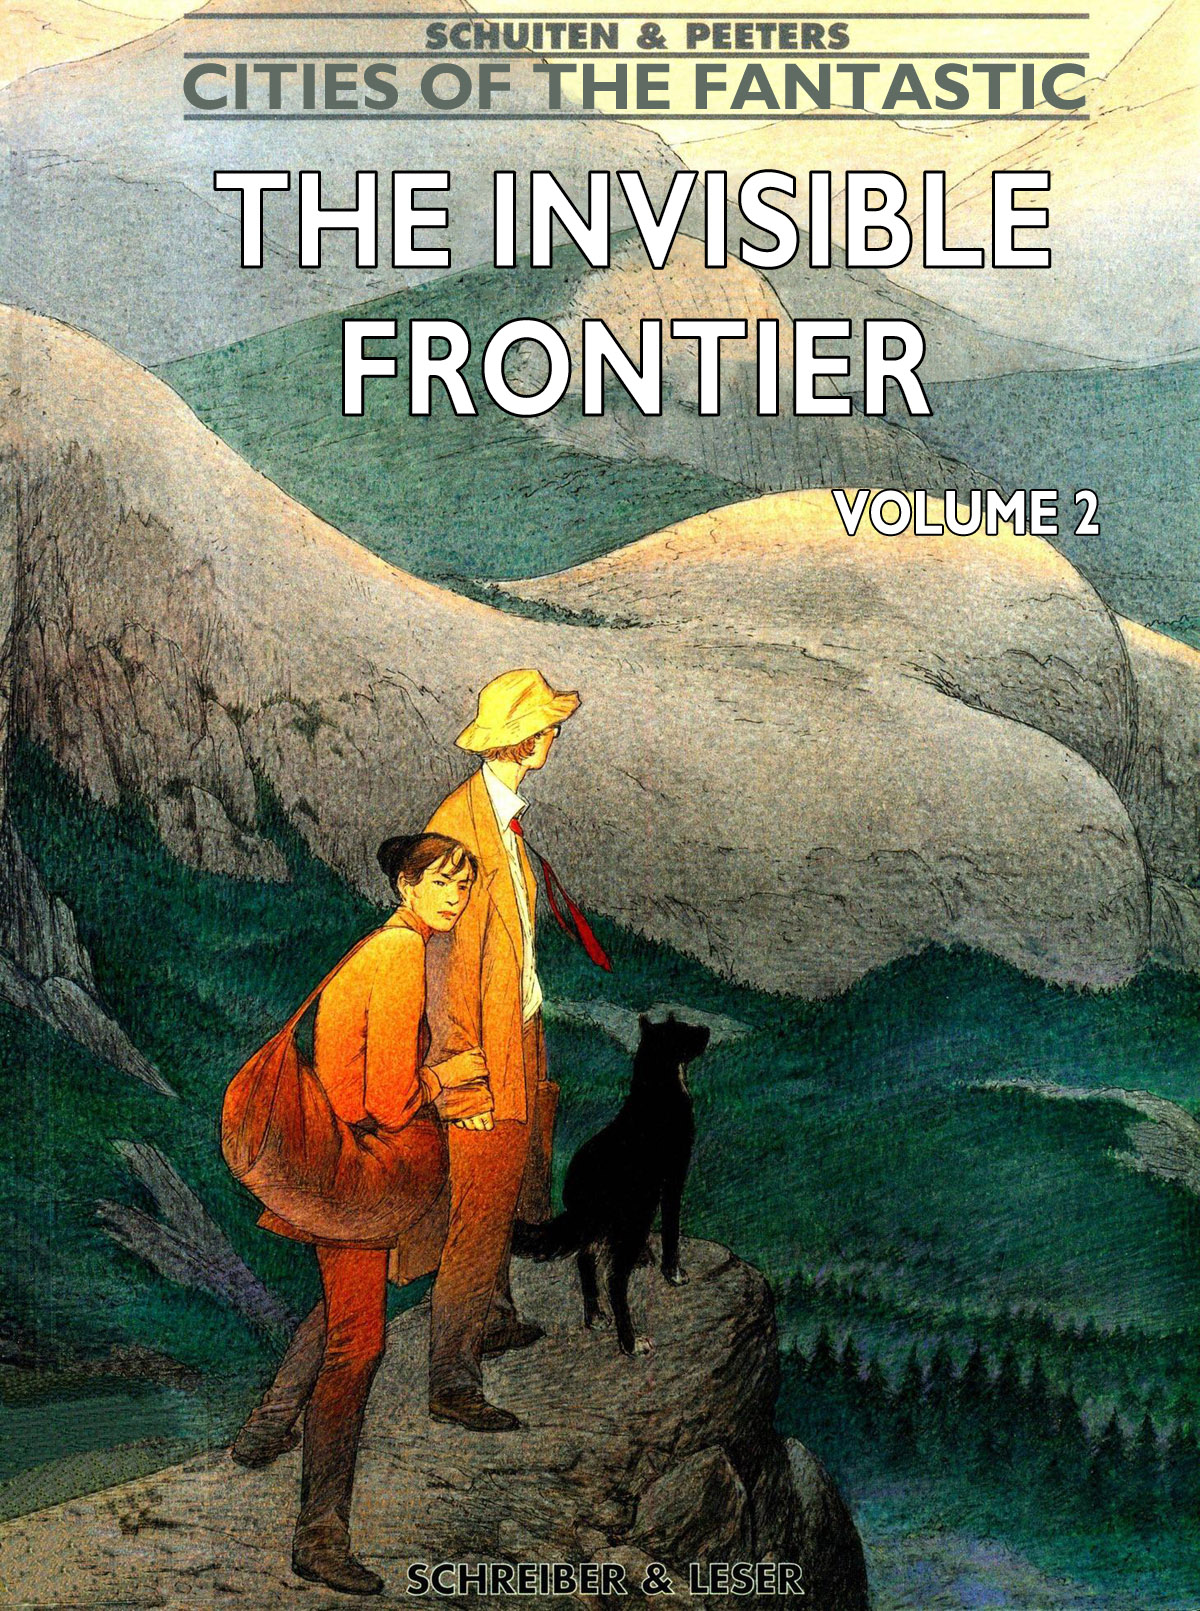 The Invisible Frontier Vol 2